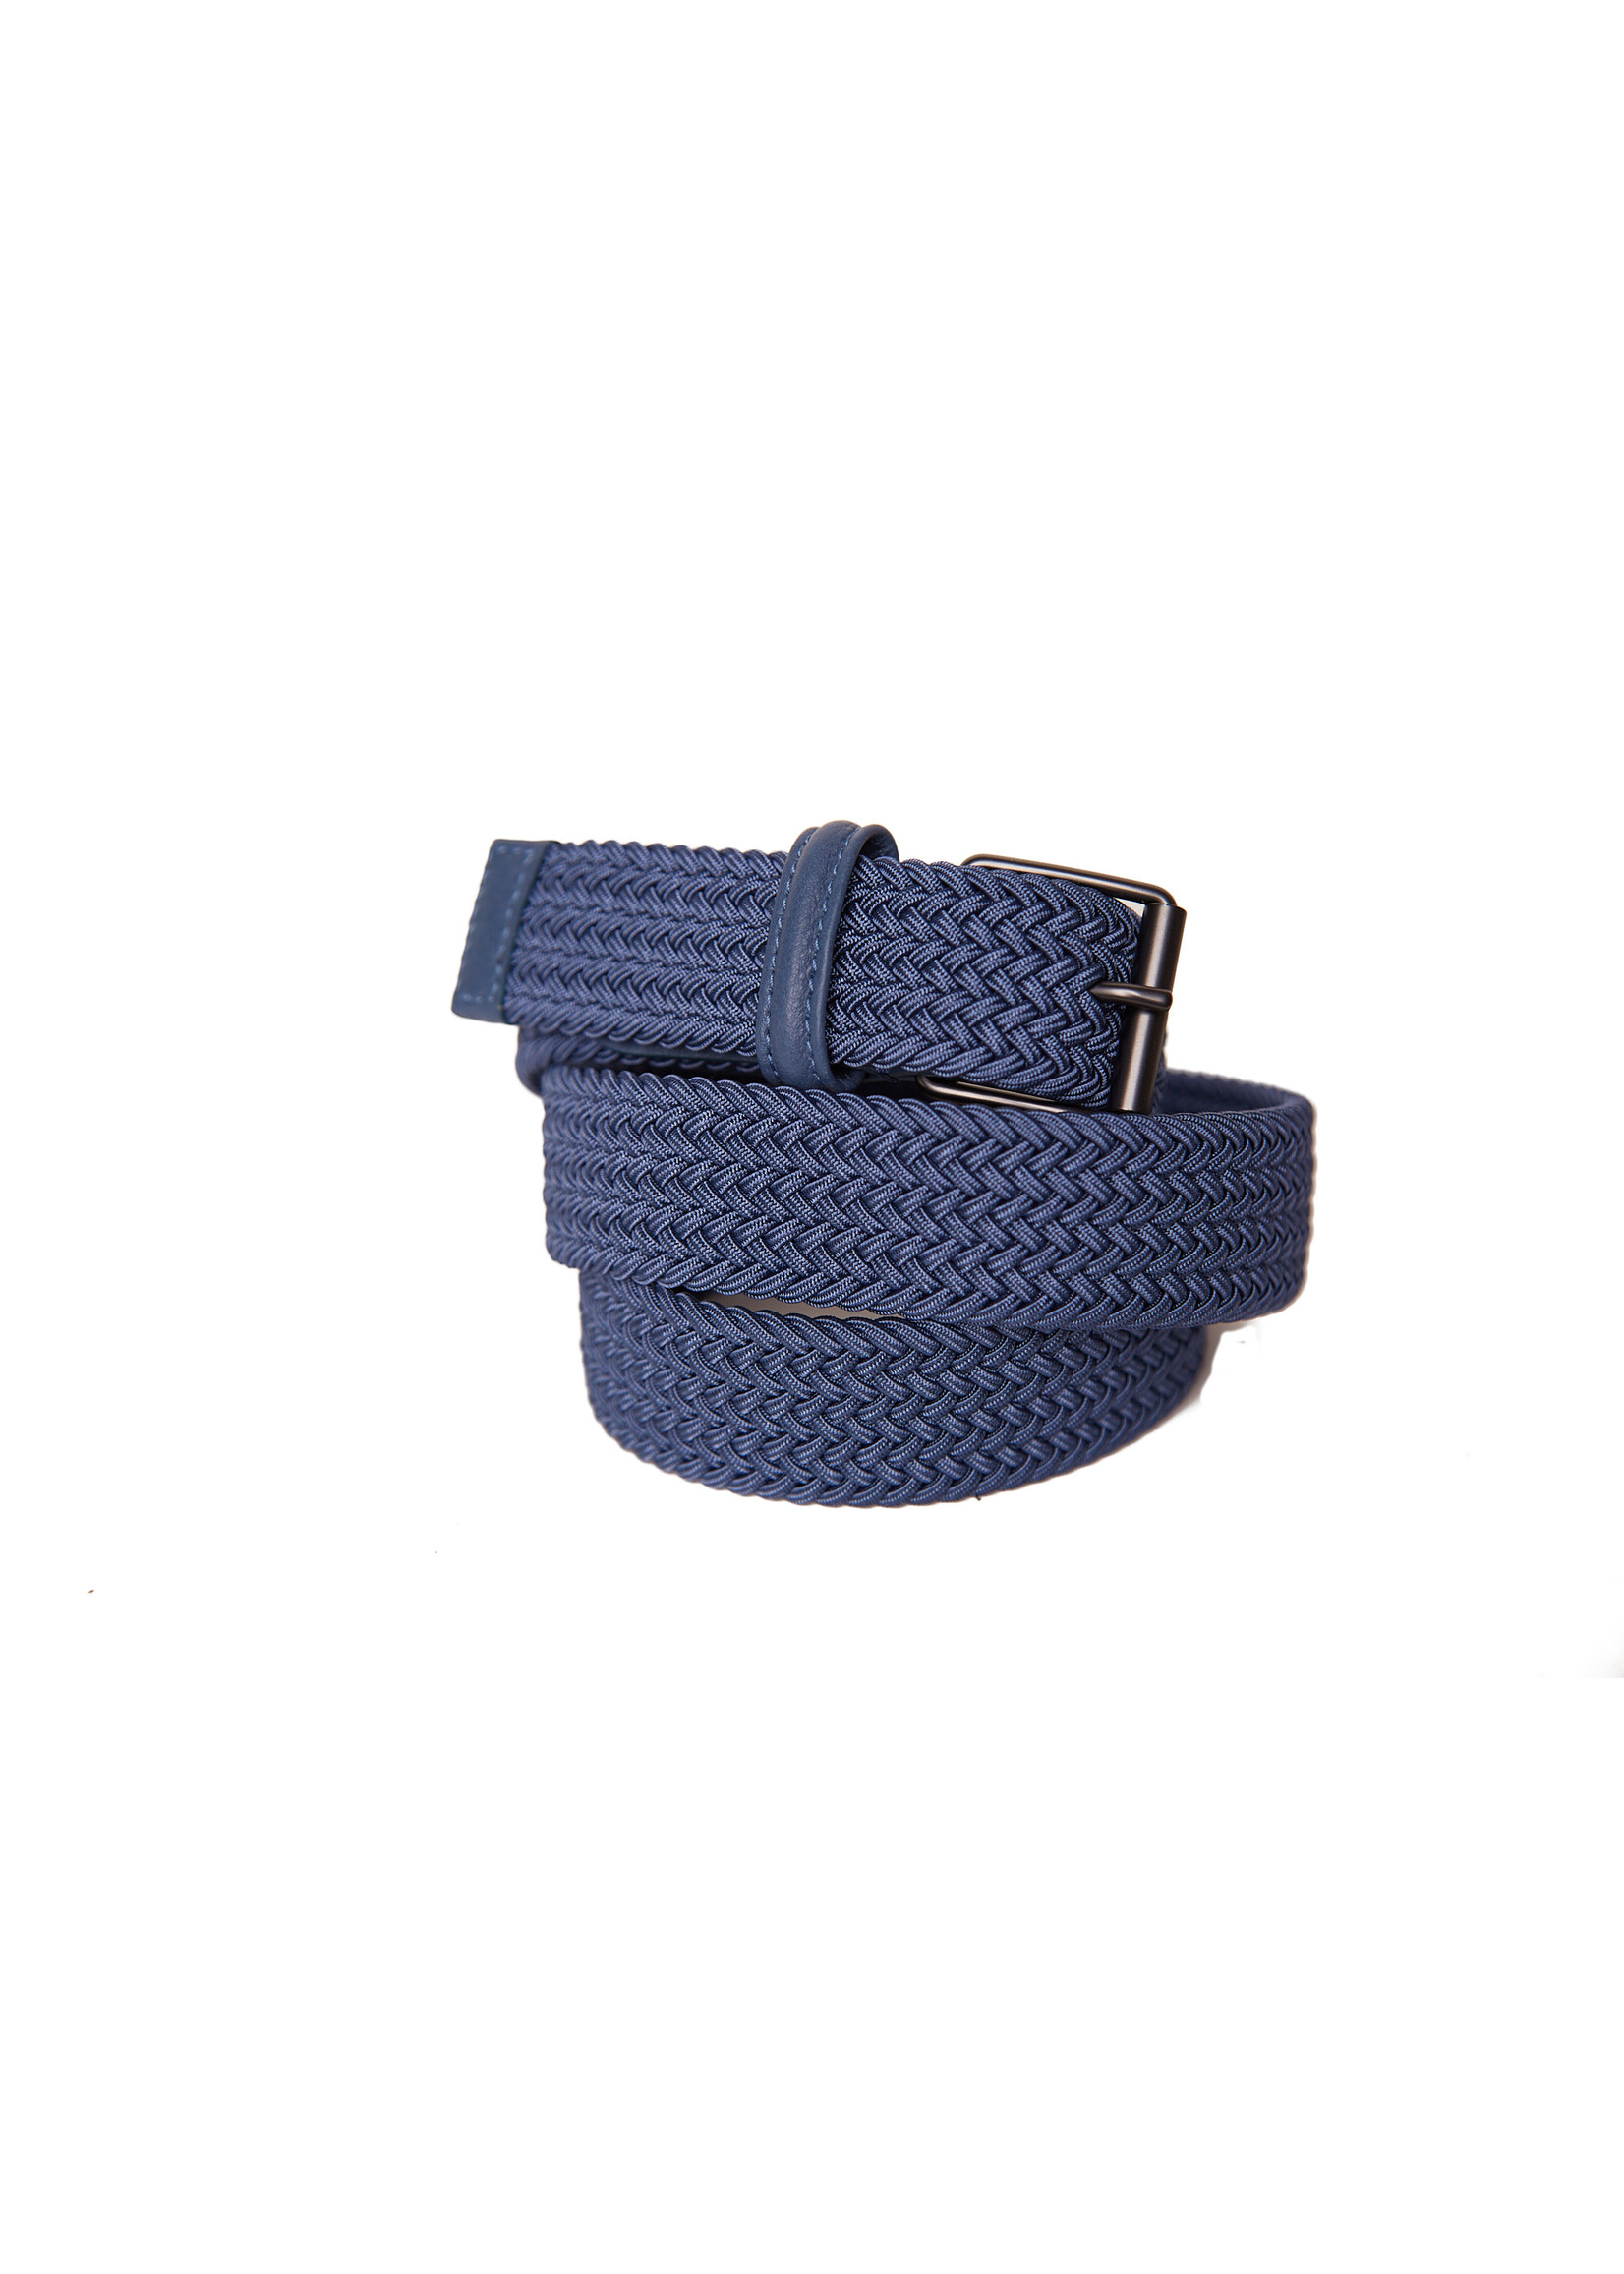 ANDERSONS STRETCH WOVEN BELT